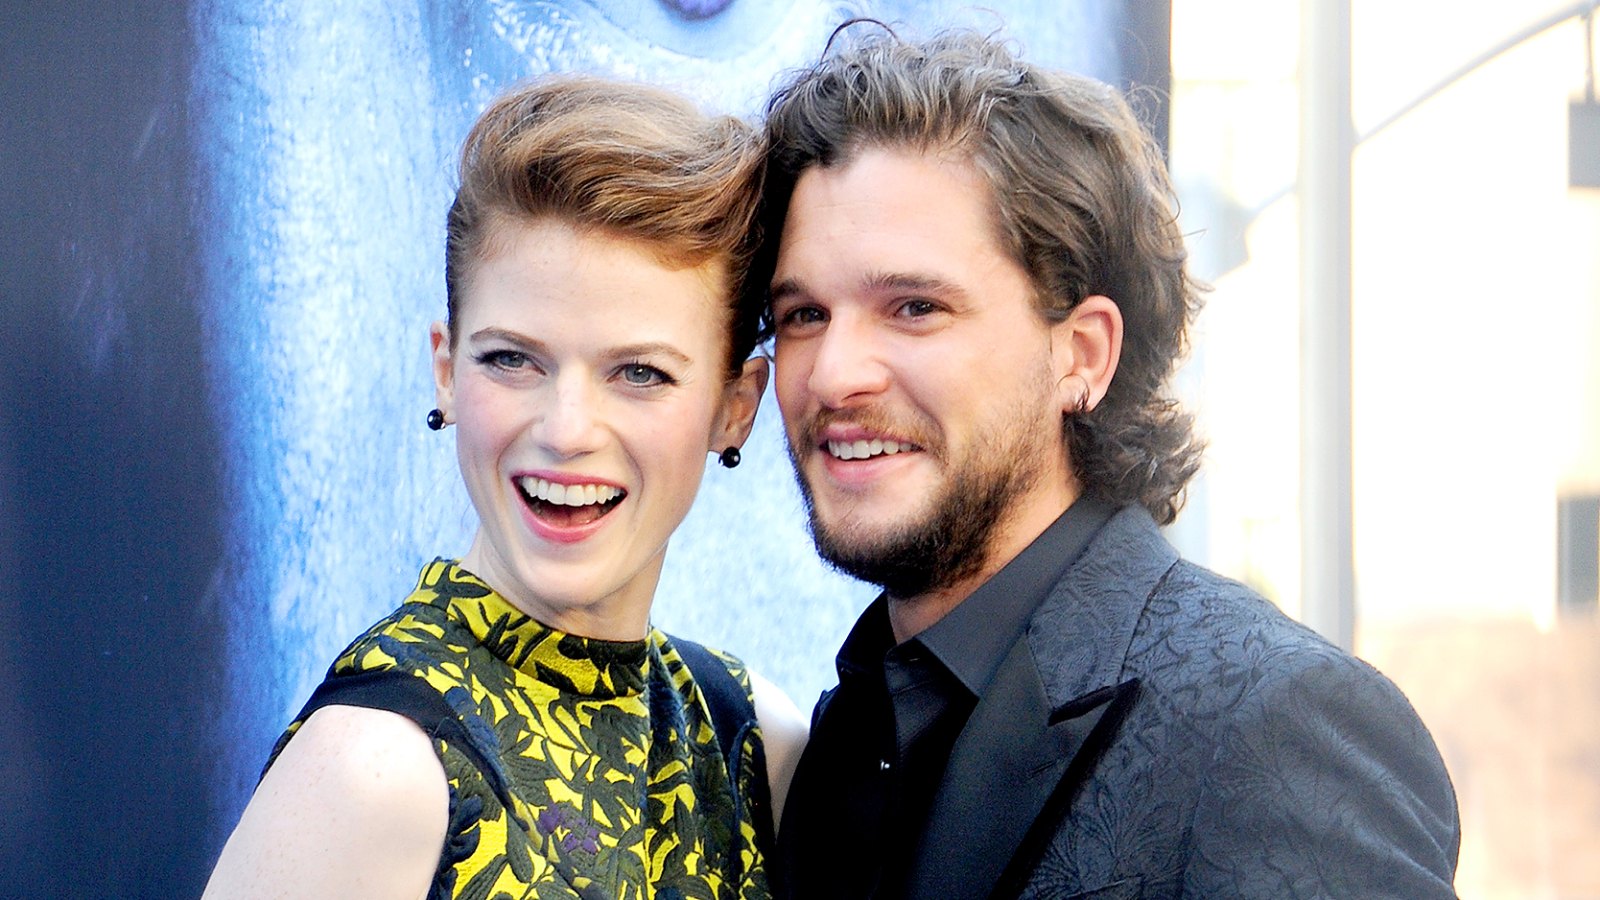 Kit Harington and Rose Leslie arrive at the premiere of HBO's "Game Of Thrones" Season 7 at Walt Disney Concert Hall on July 12, 2017 in Los Angeles, California.